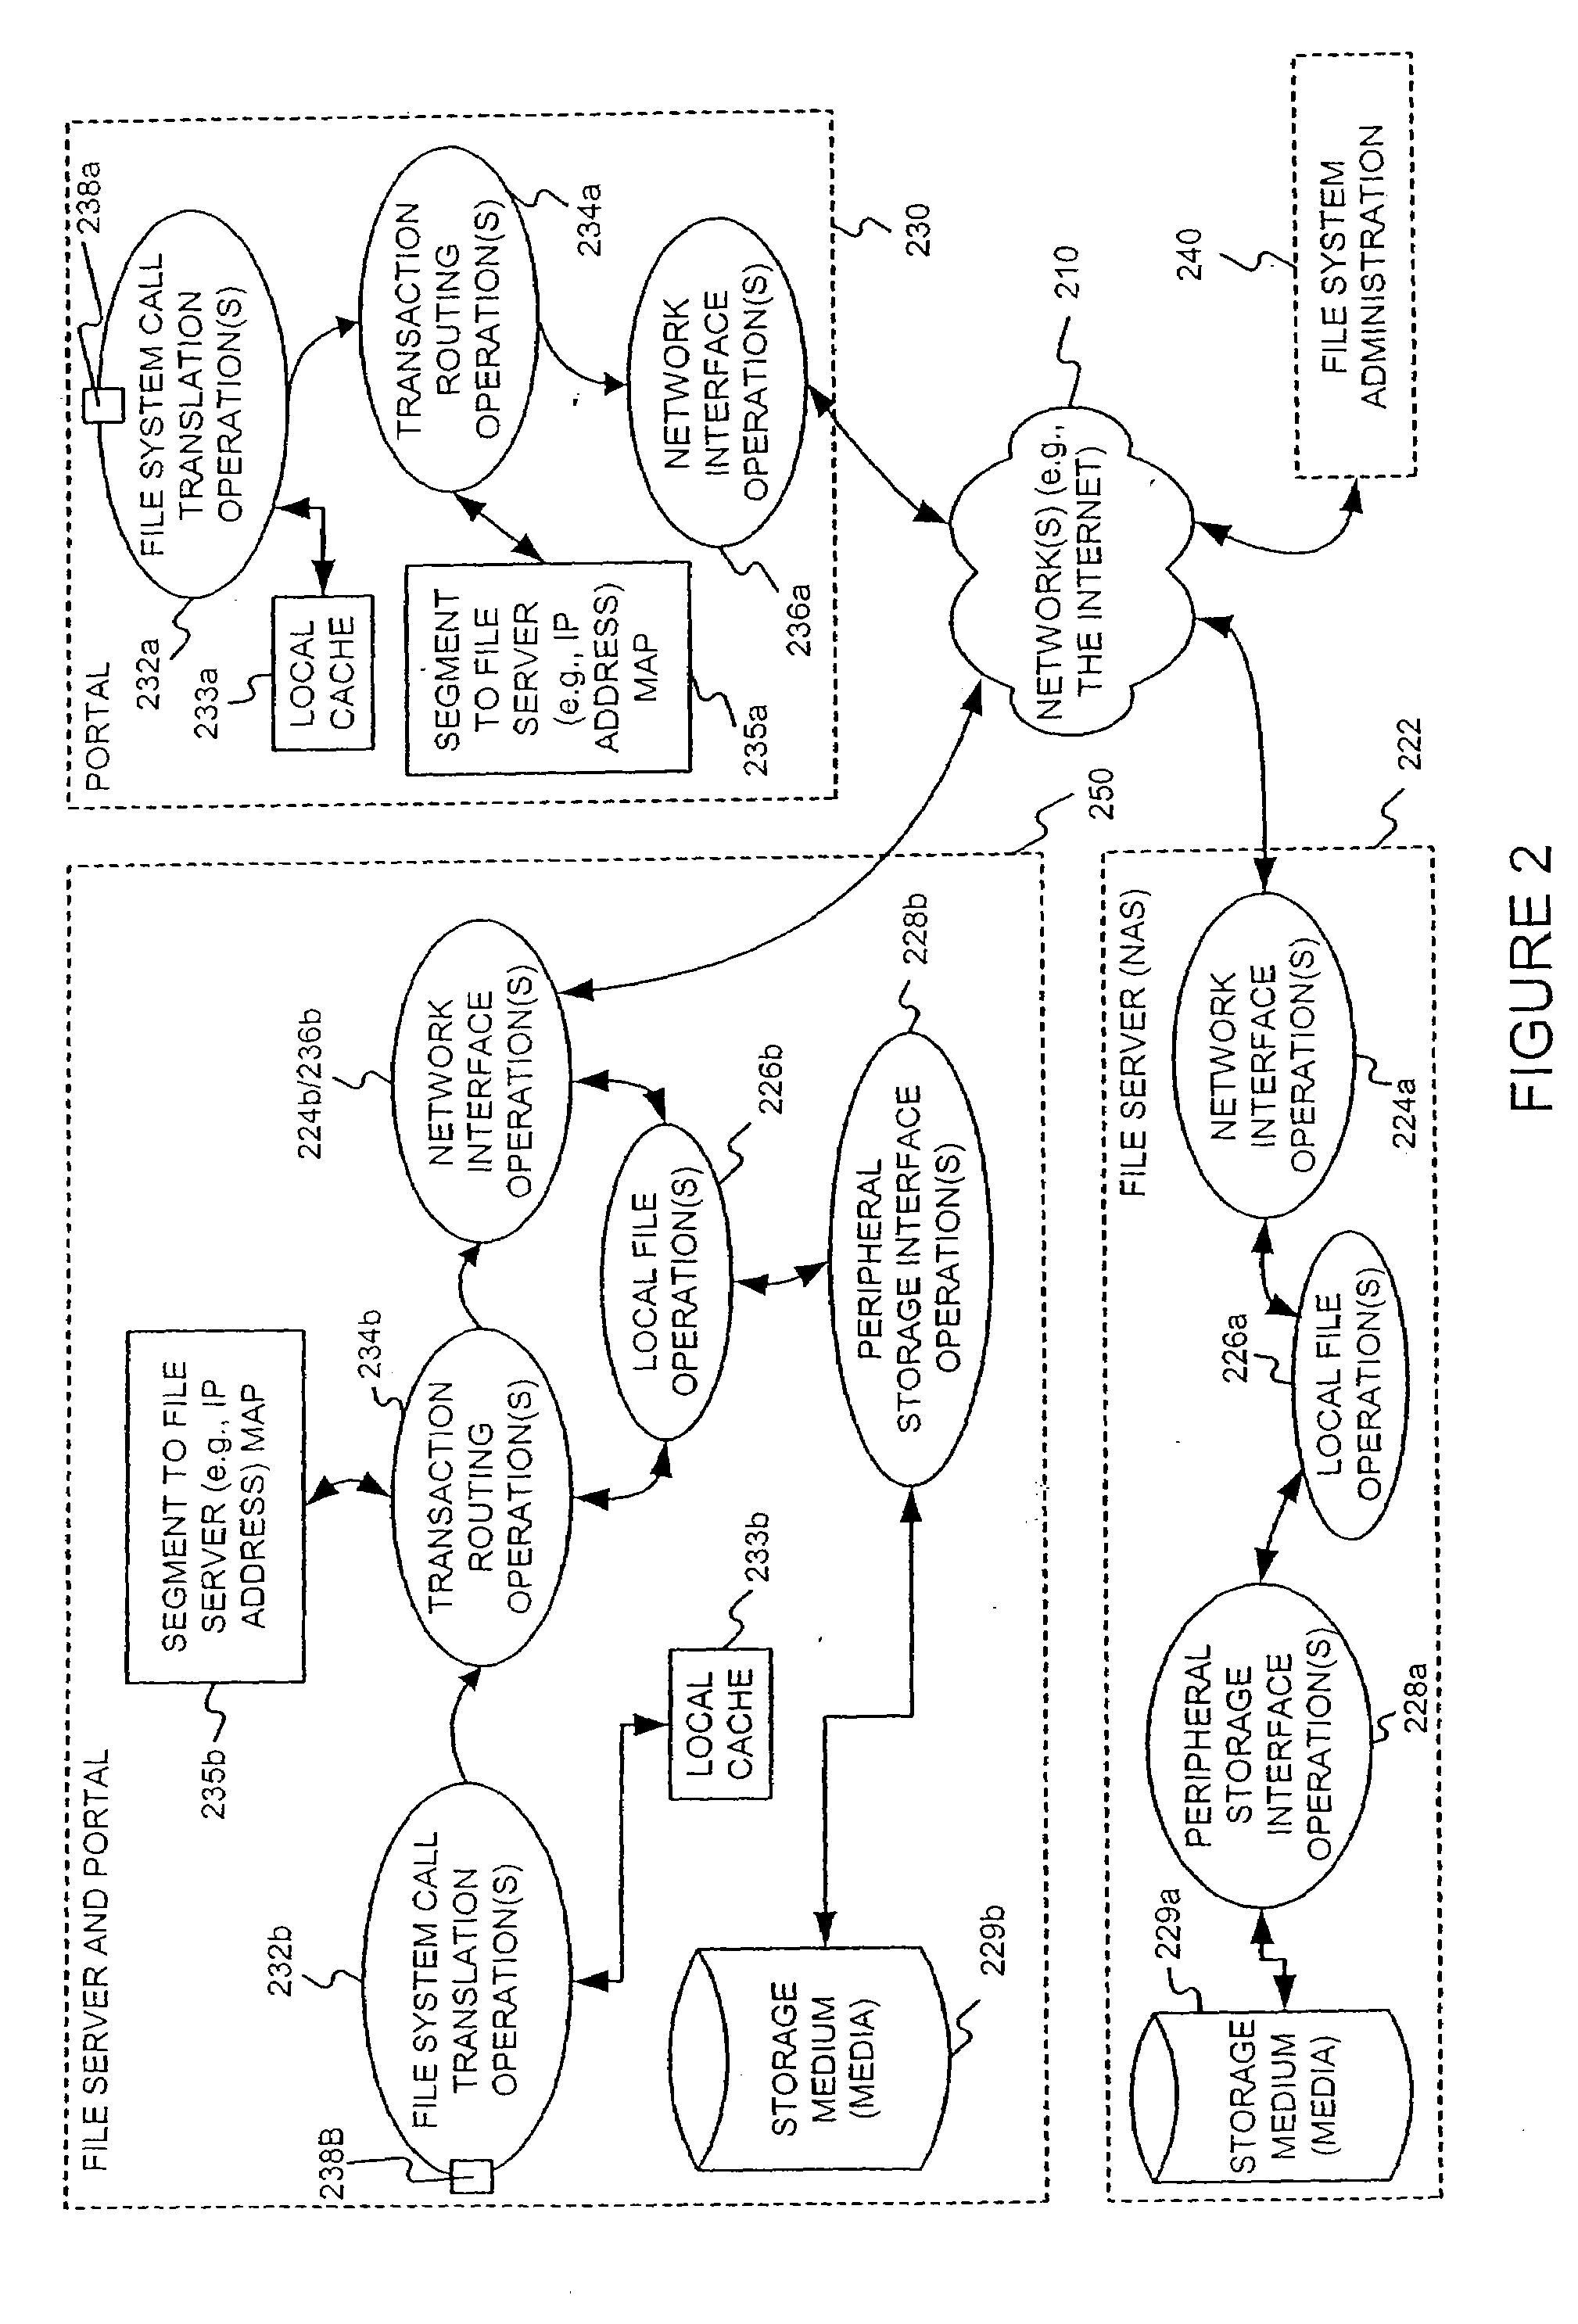 Storage allocation in a distributed segmented file system